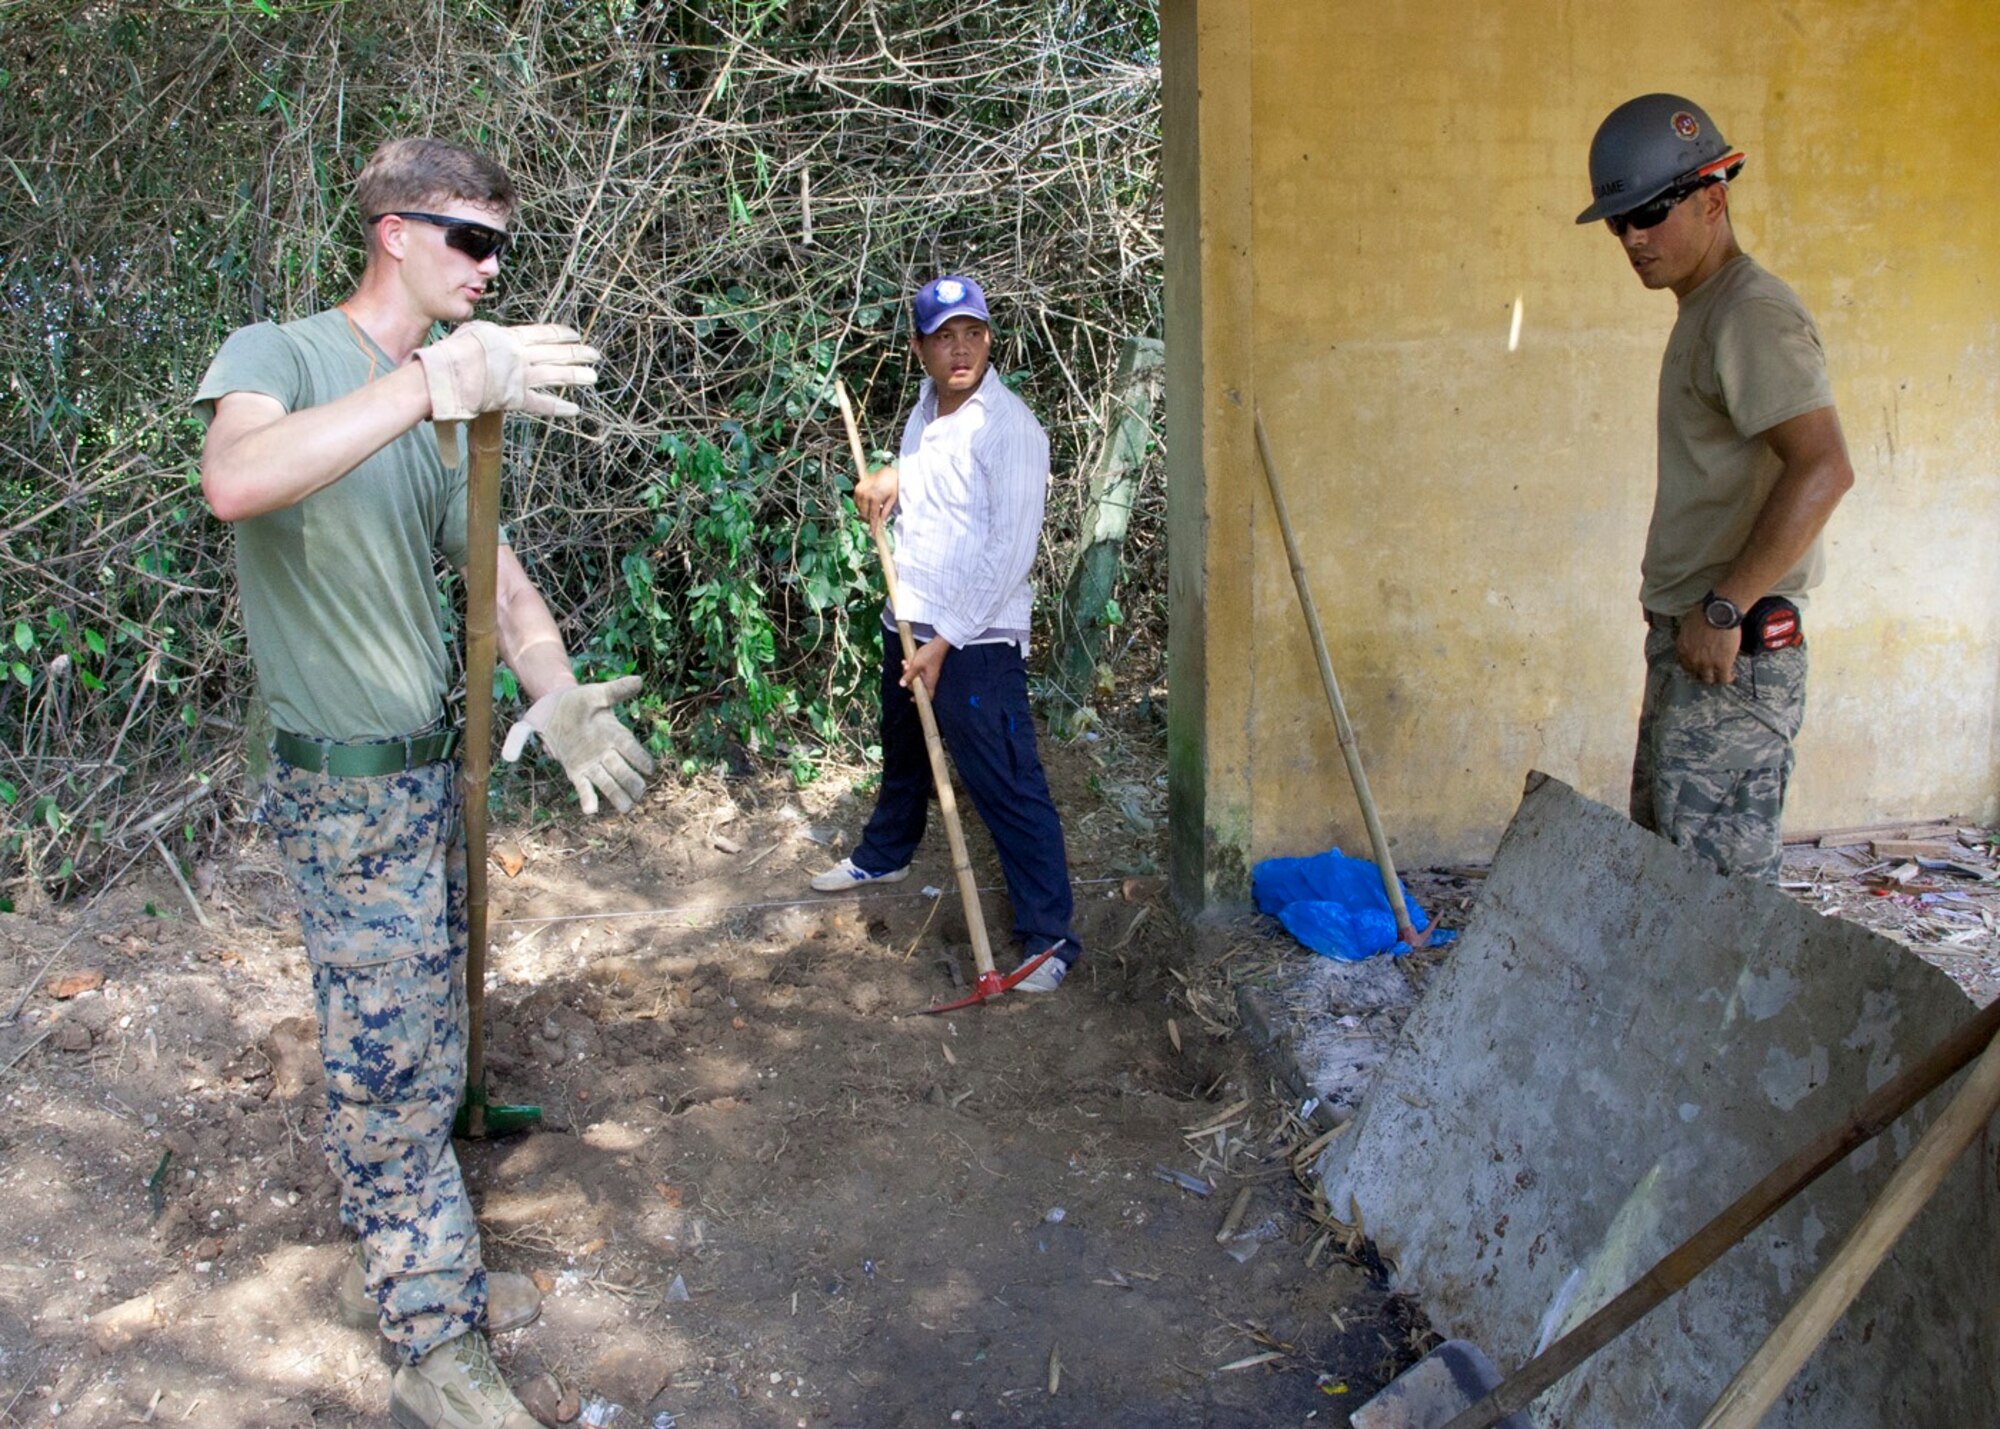 U.S. servicemembers and a Vietnam People's Army Defense member, middle, discuss the progress of preparing a site for pouring a concrete pad at Binh Thanh Dong primary school, Quang Ngai Province, Vietnam, during a Operation Pacific Angel 15-3 event, March 23, 2015. This is the fifth time PACANGEL has partnered with the host nation to provide humanitarian assistance and disaster relief in the region.  (U.S. Air Force photo by Staff Sgt. Tong Duong/ Released)